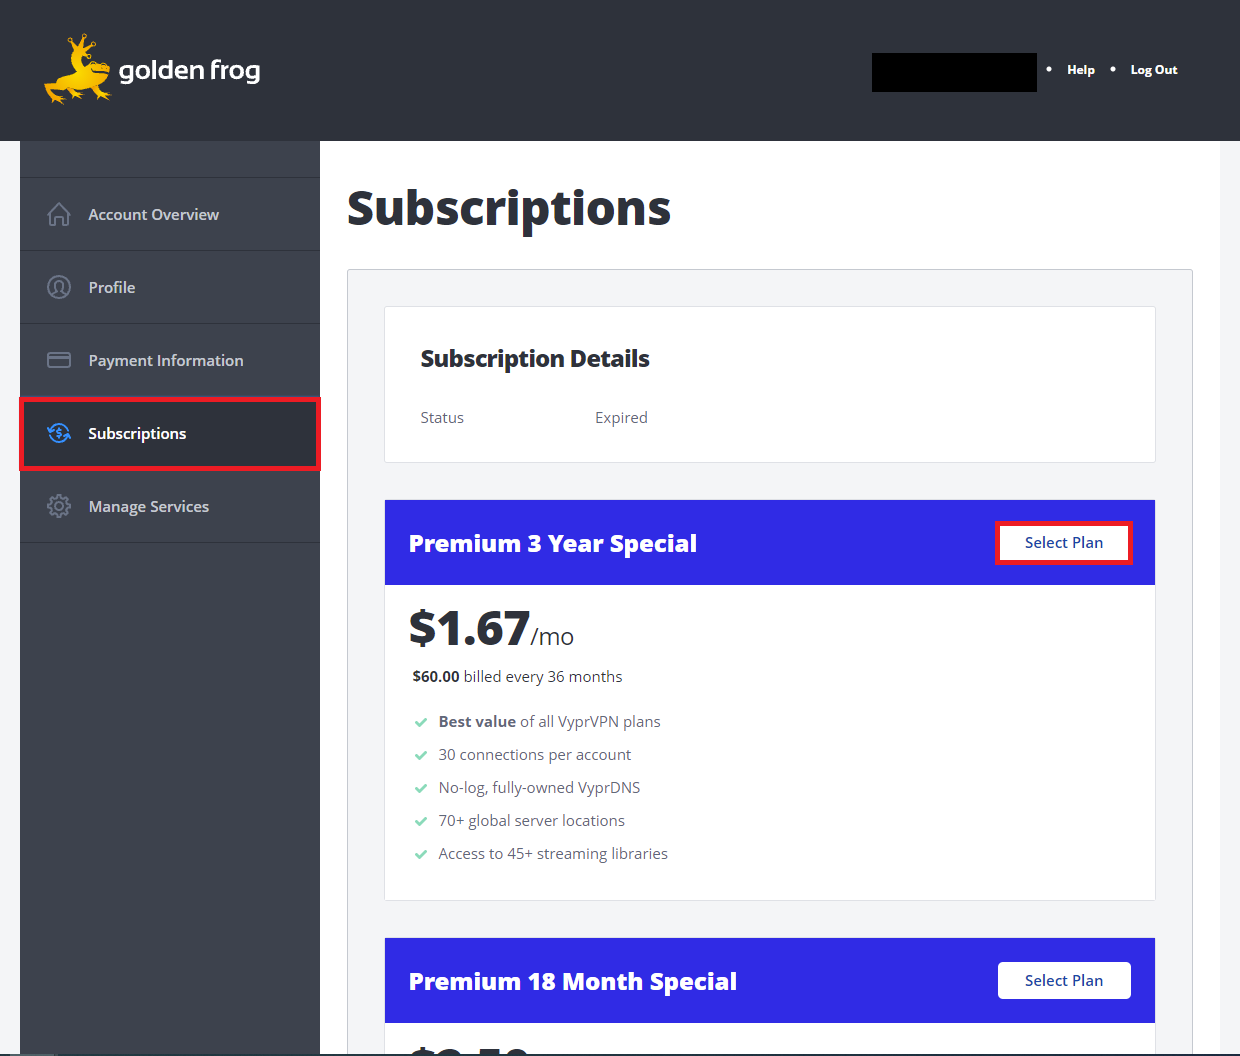 Subscriptions_Tab_-_Subscriptions_and_Select_Plan_Highlighted.png